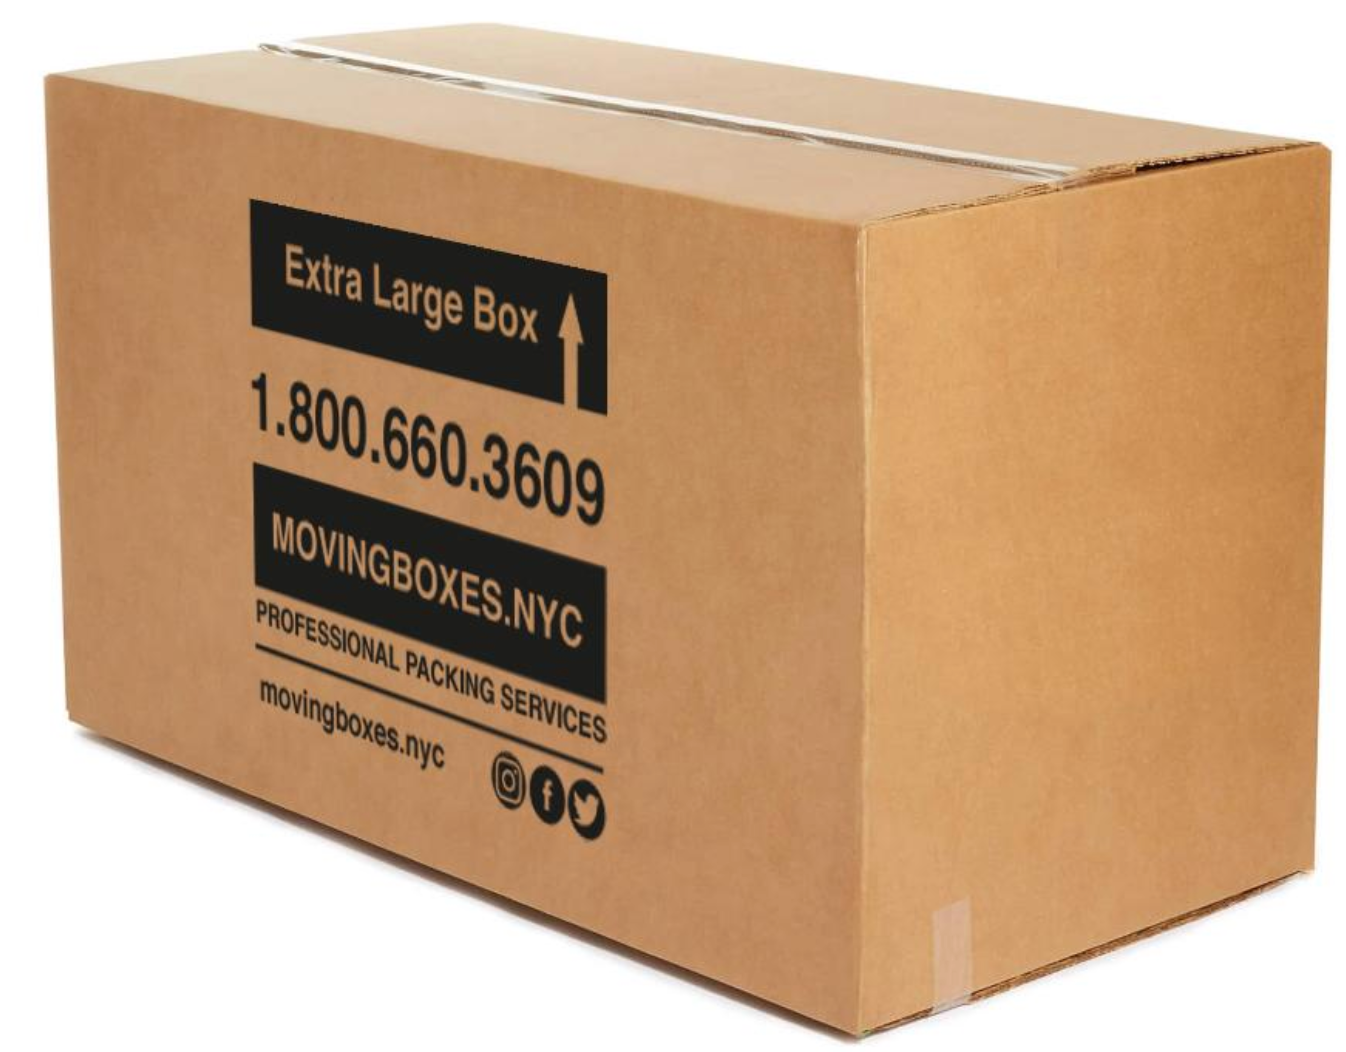 Extra Large Furniture Moving Box - 48″ X 24″ X 28″ – Moving Boxes.NYC